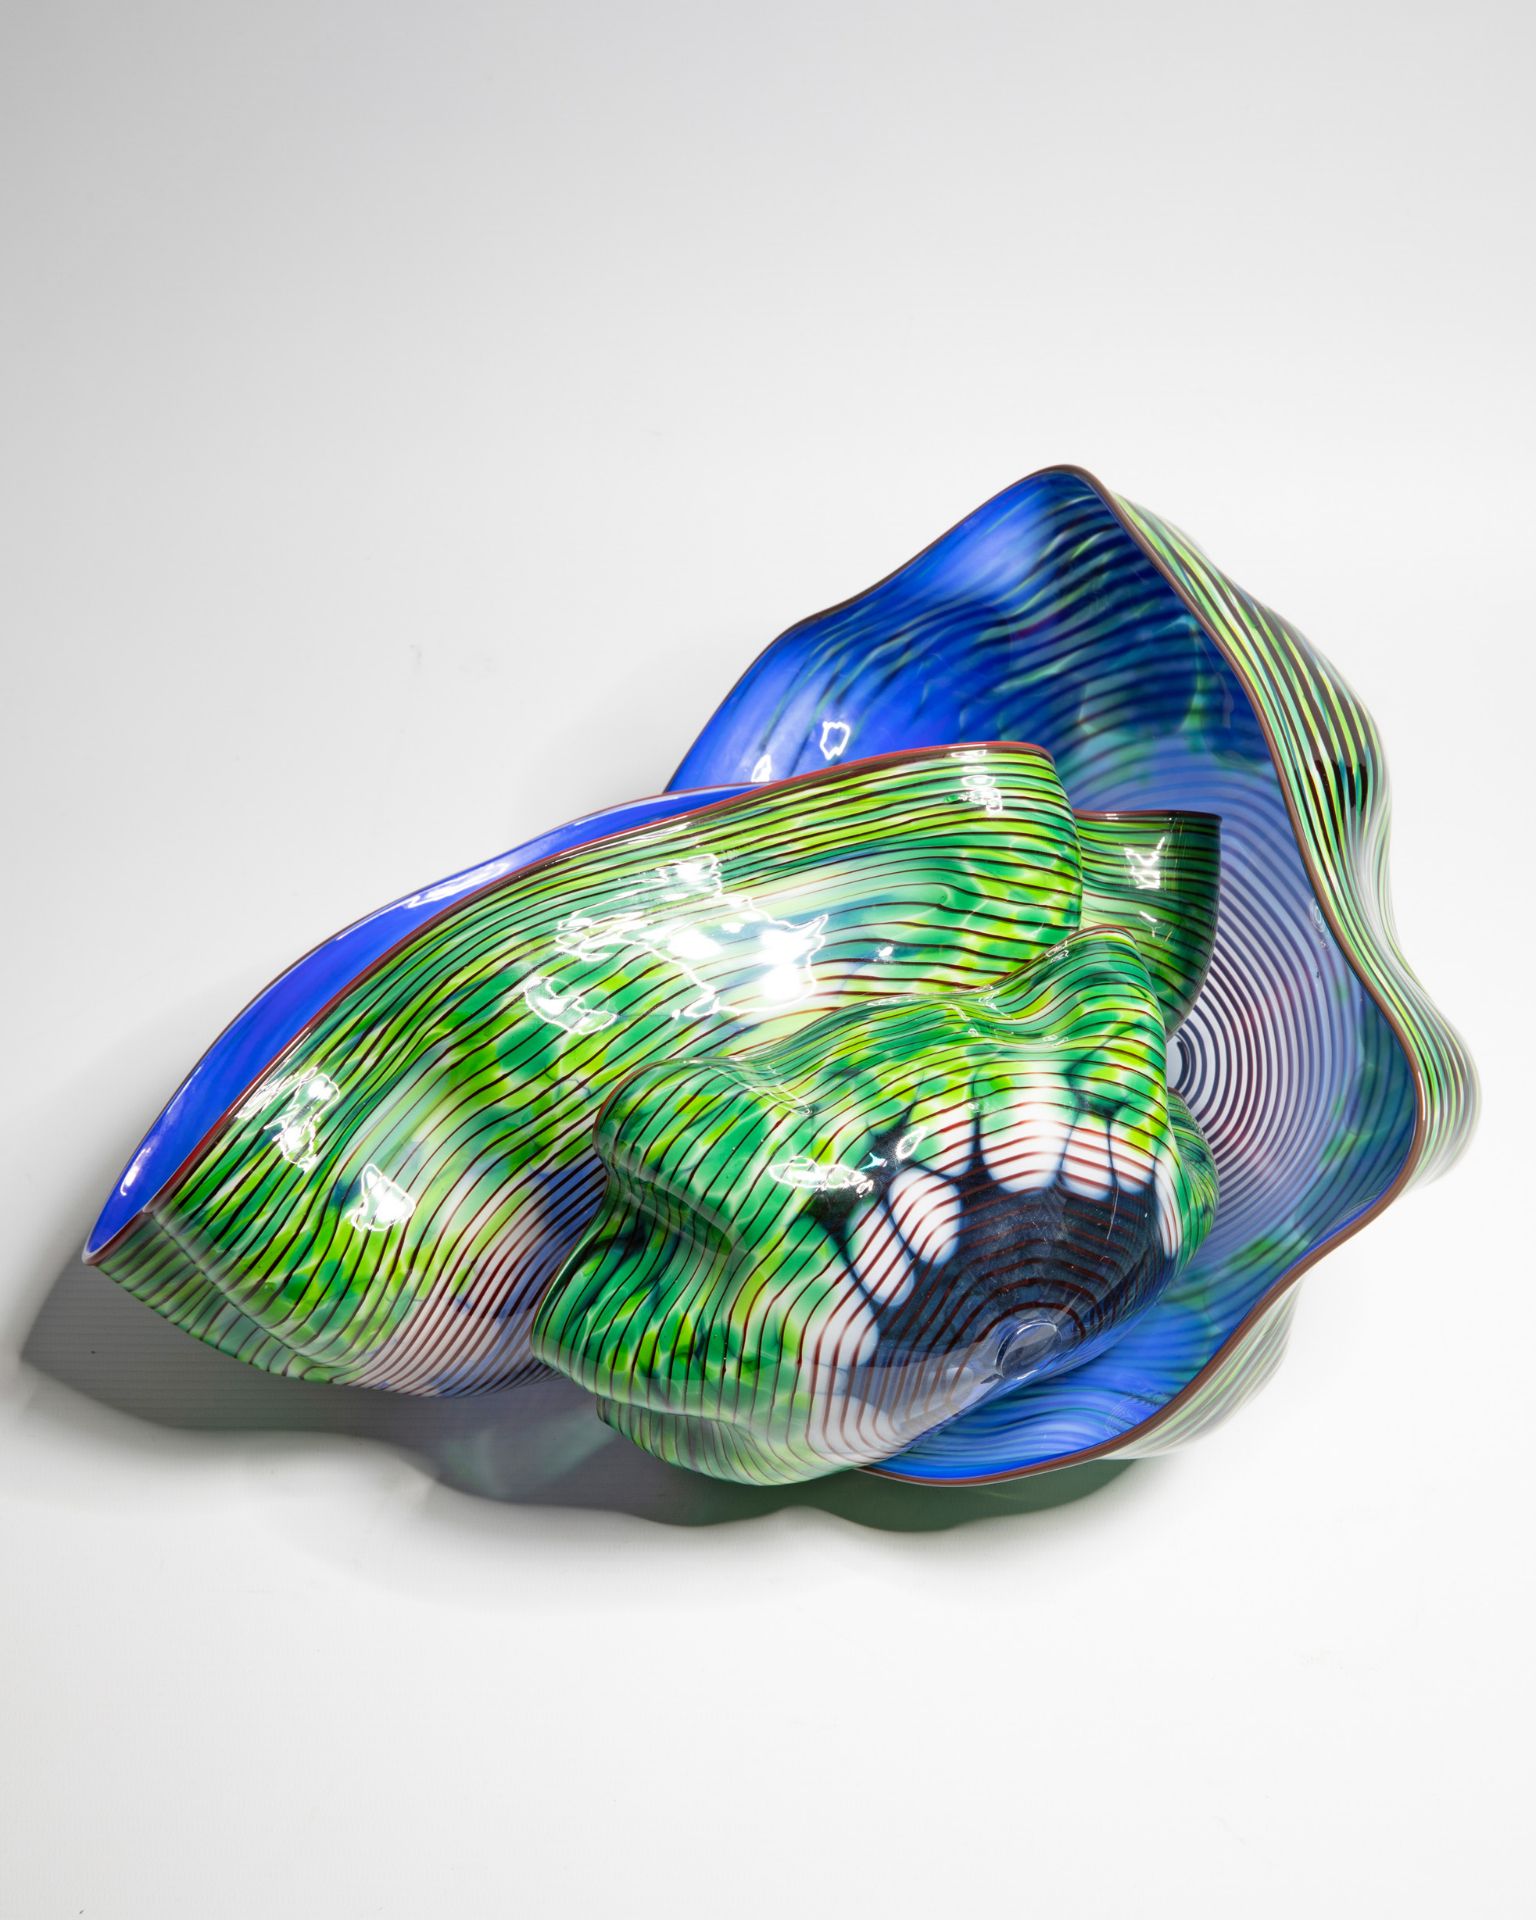 Dale Chihuly, 3 seaforms piece sculptural glasforms - Image 2 of 17